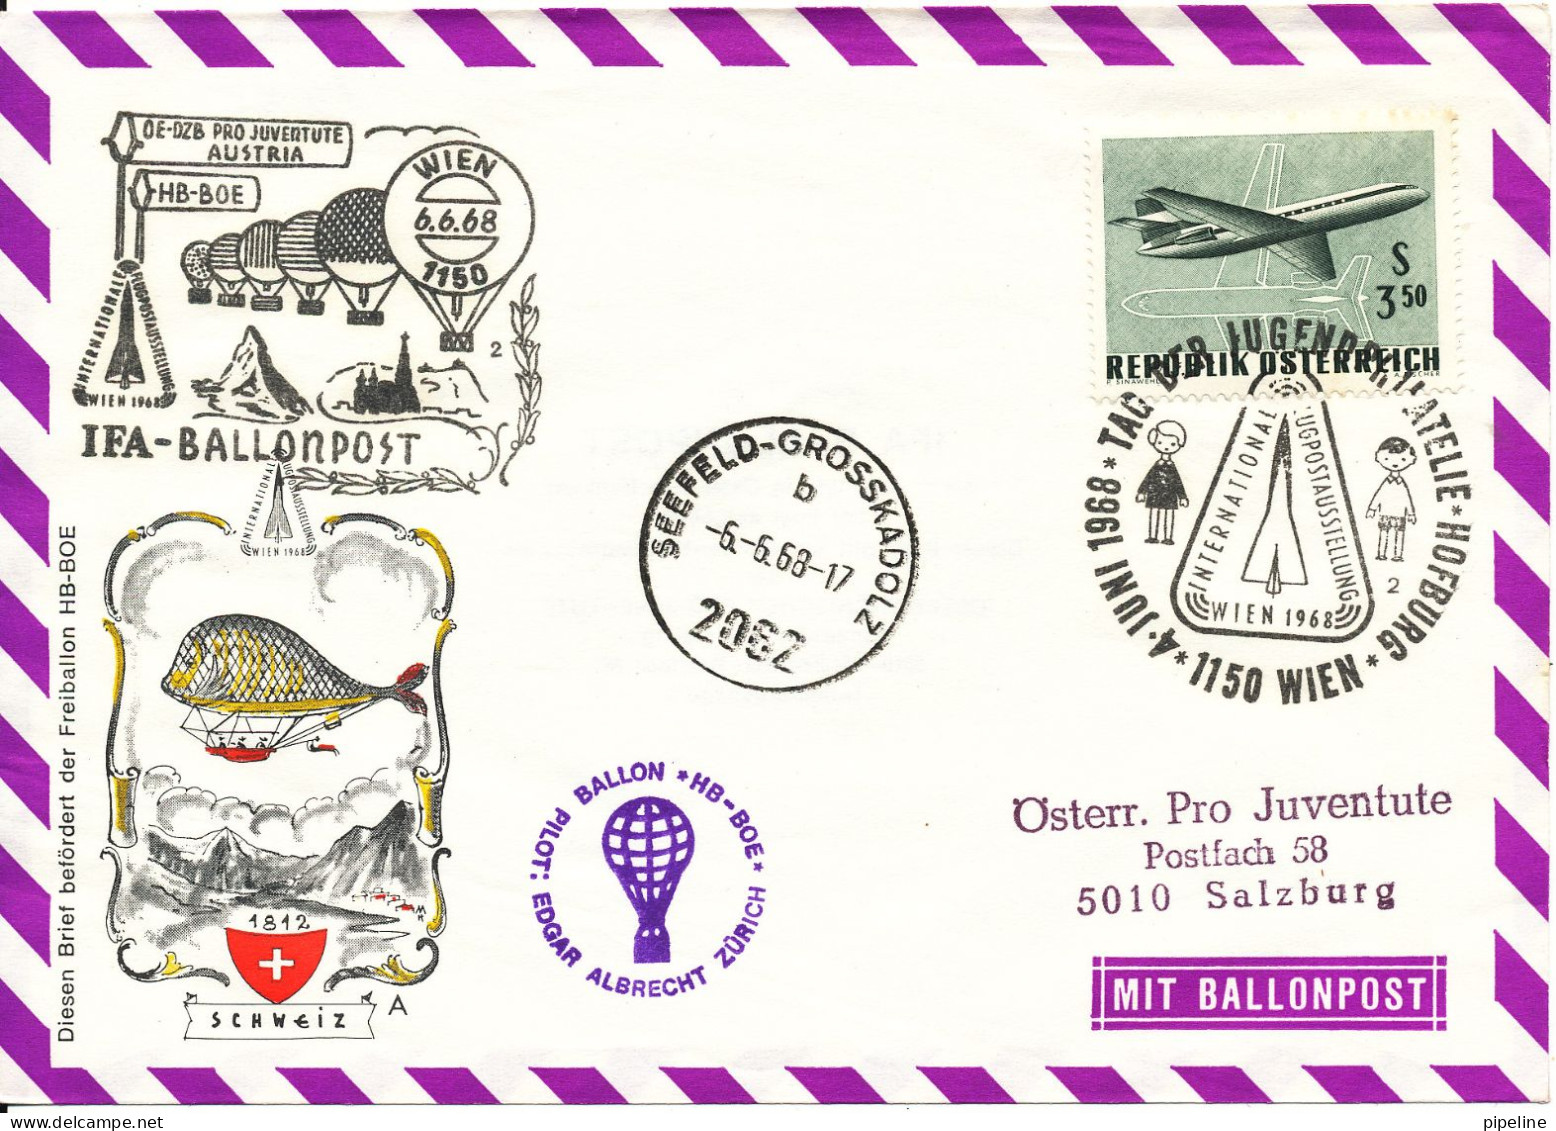 Austria Balloon Cover With A Lot Of Cancels And Postmarks 1968 - Ballonpost